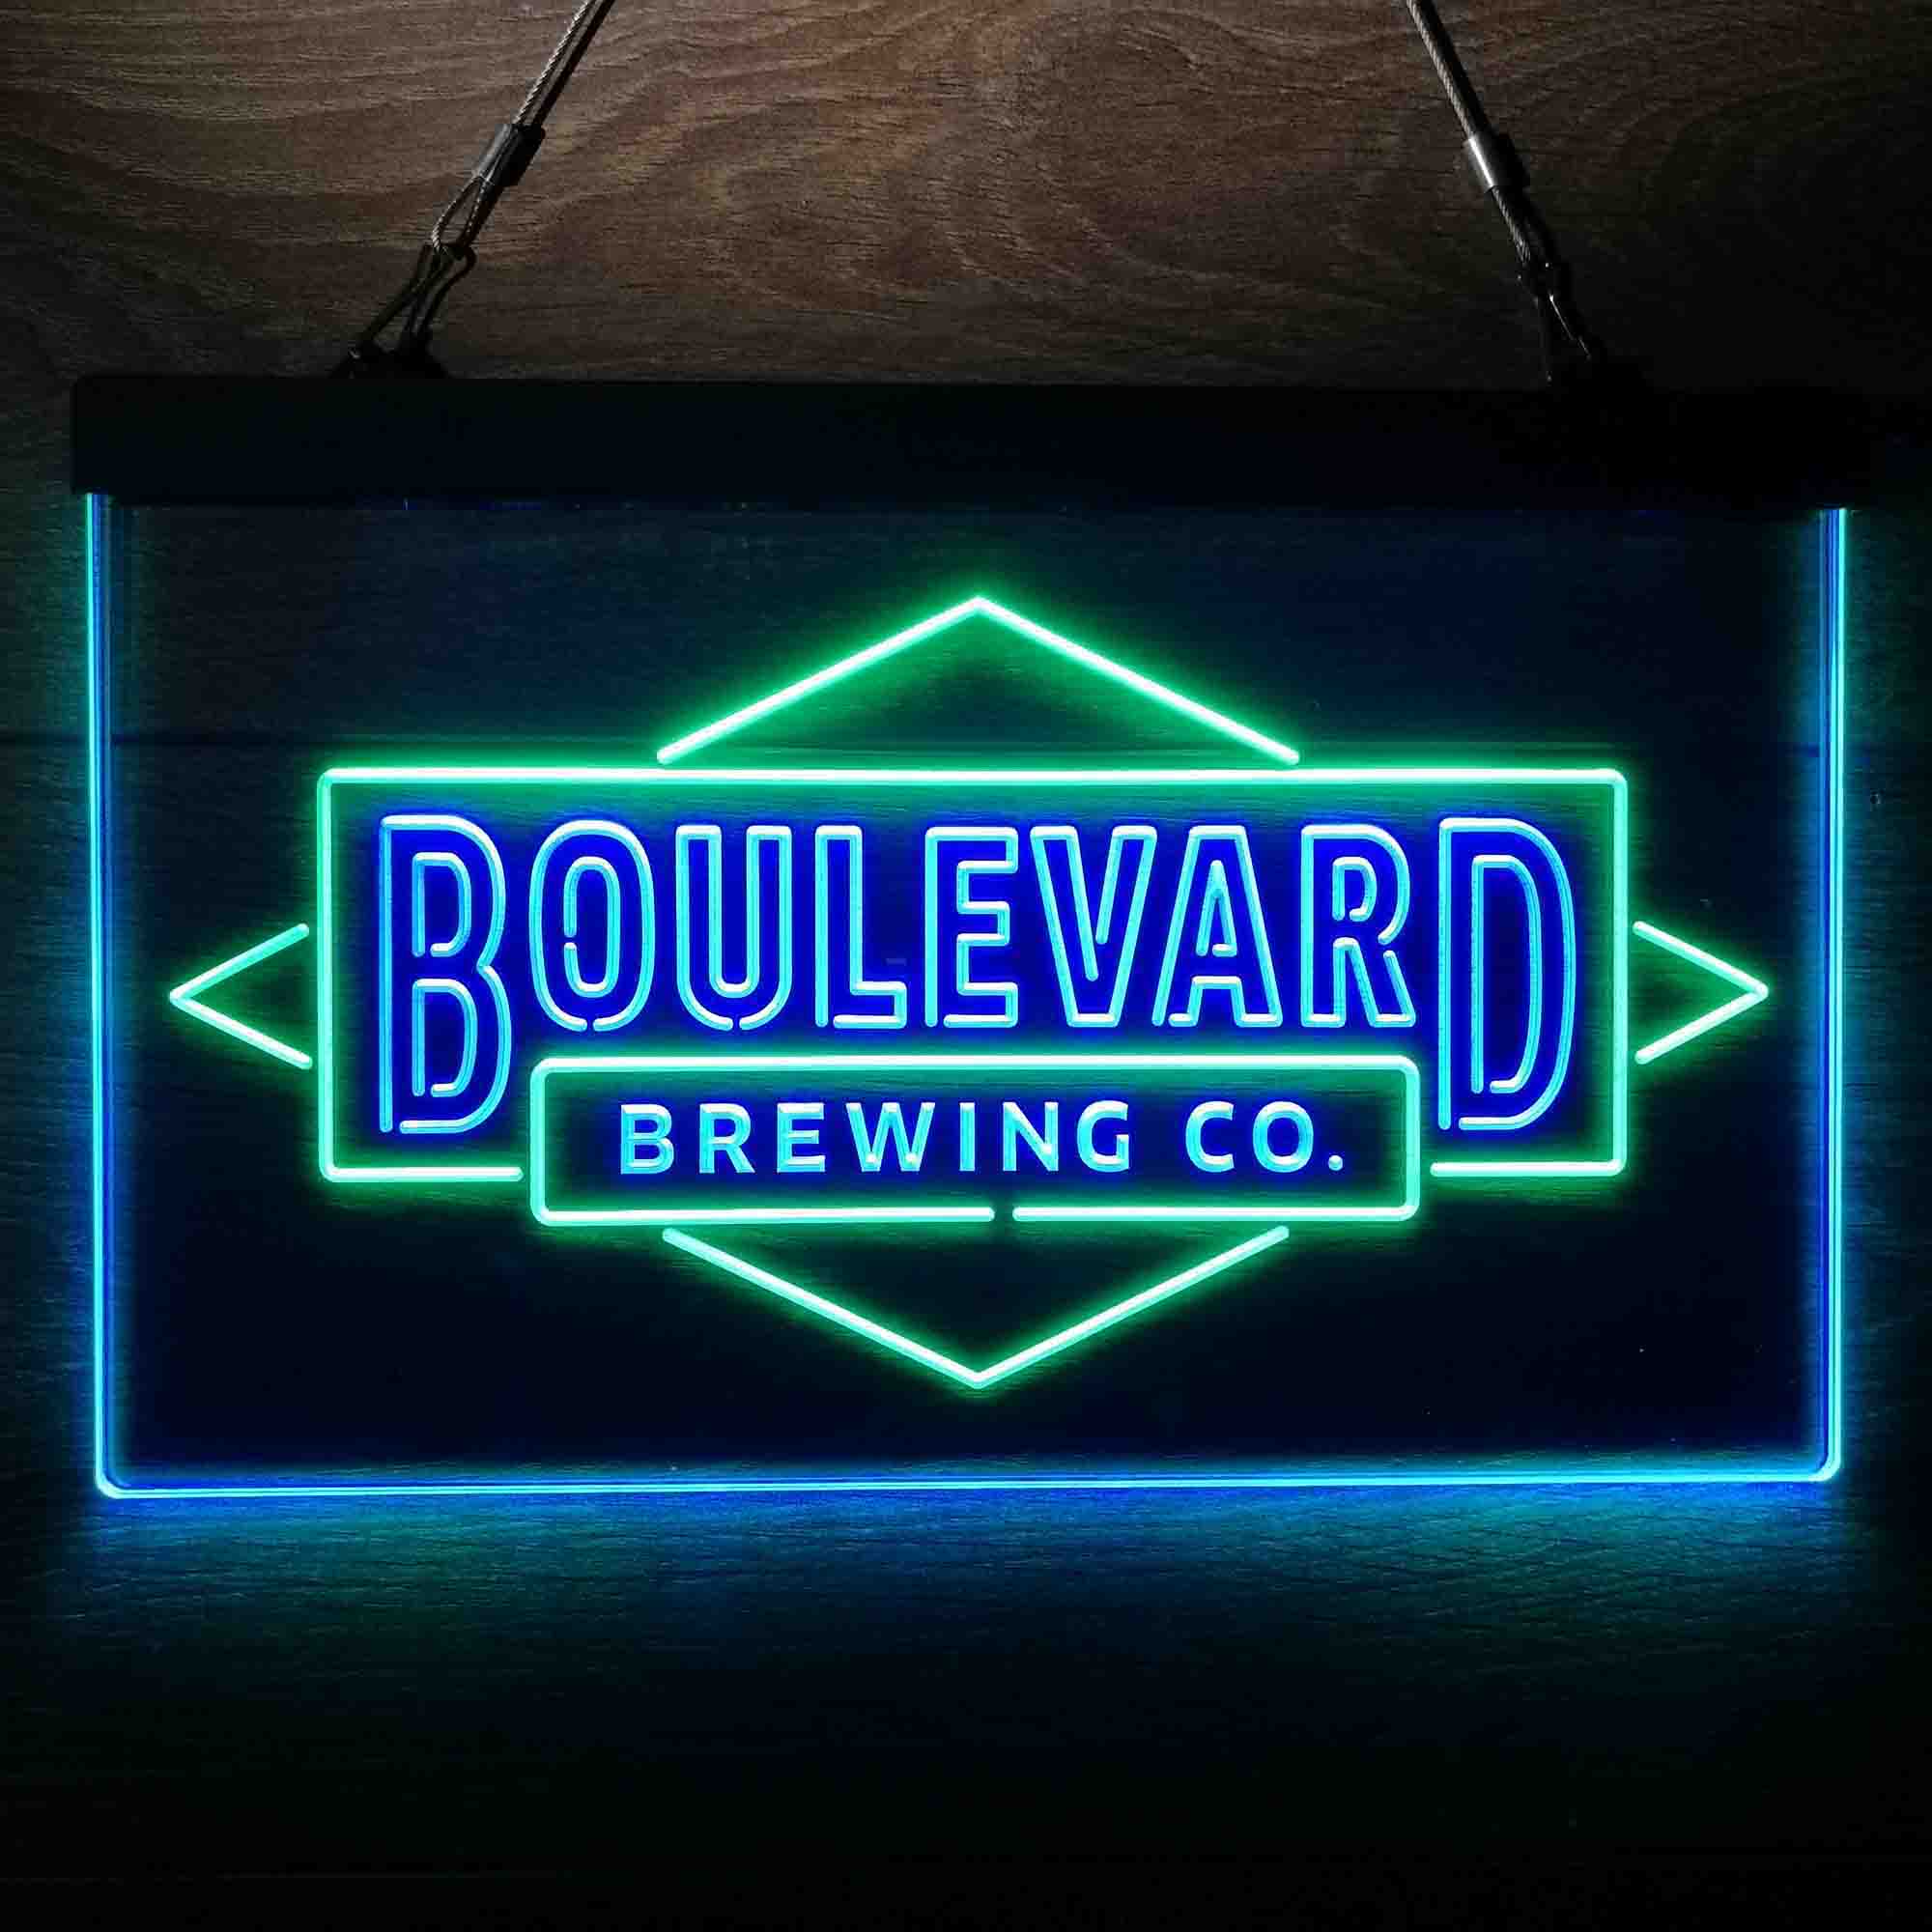 Boulevard Brewing Company Neon LED Sign